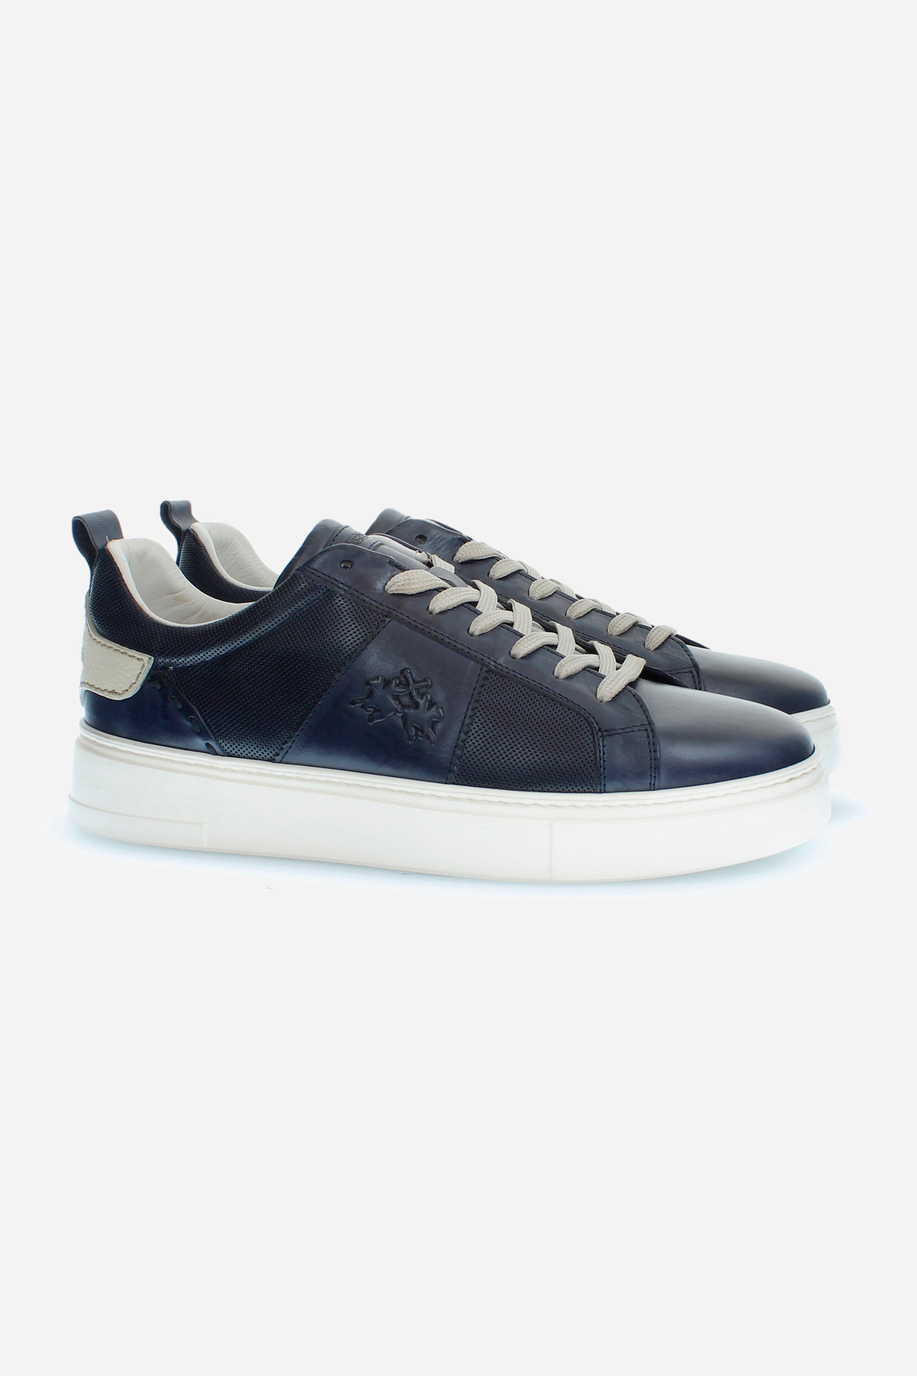 Men's leather trainers with contrasting inserts - Sneakers | La Martina - Official Online Shop